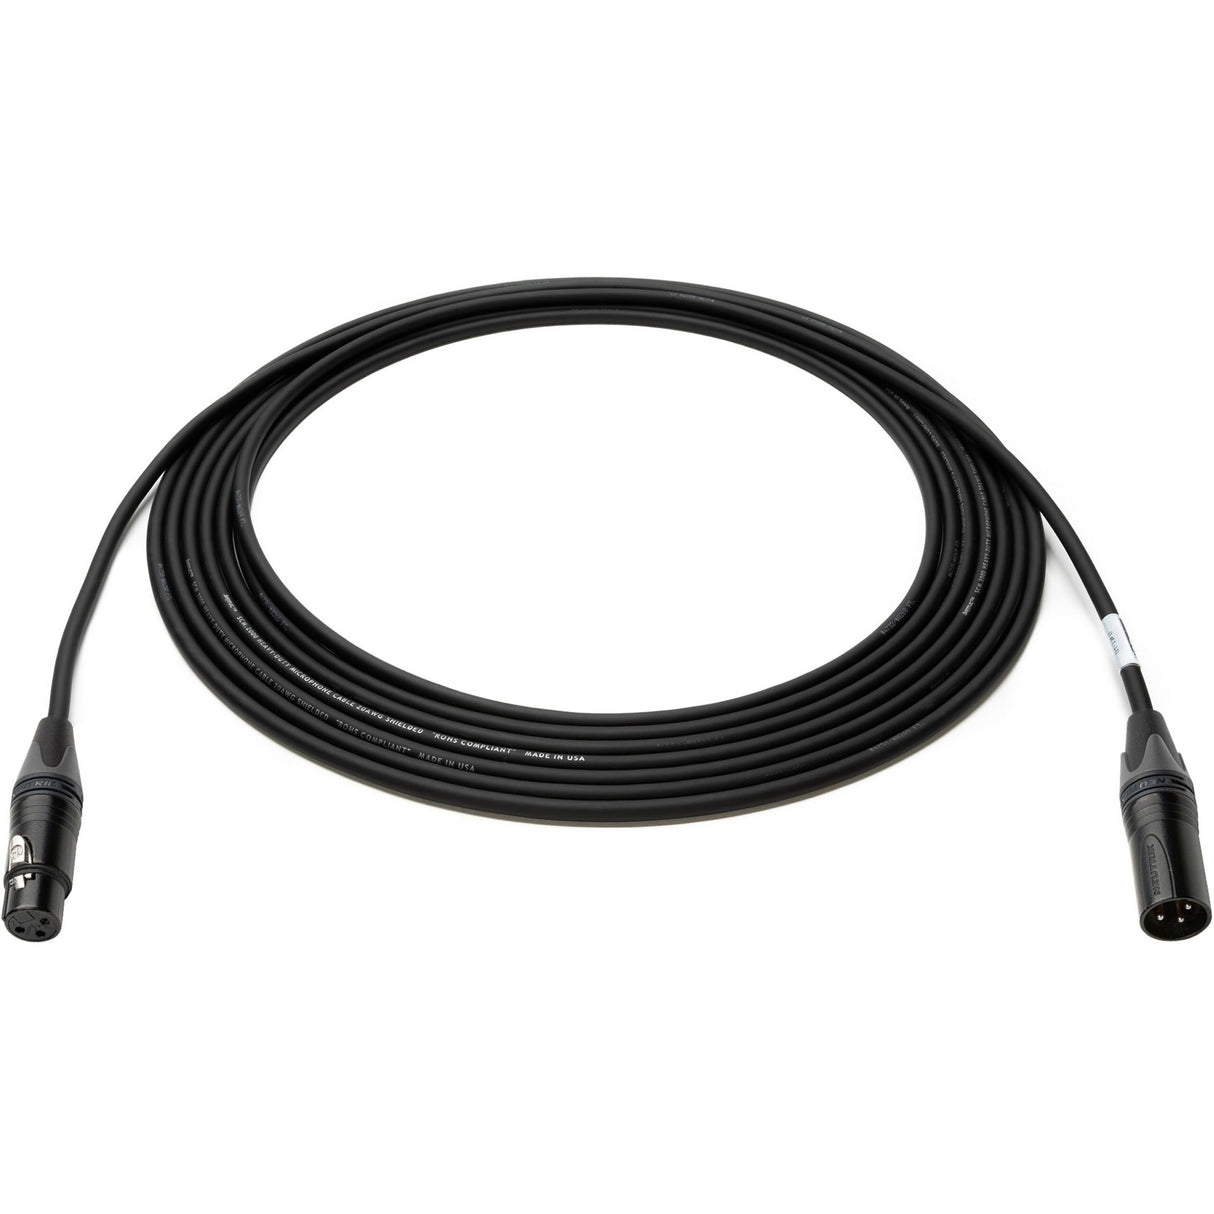 Sescom SCTX-XXJ-010 Touring Grade Microphone Cable with Neutrik Black and Silver 3-Pin XLR Connectors, 10-Foot